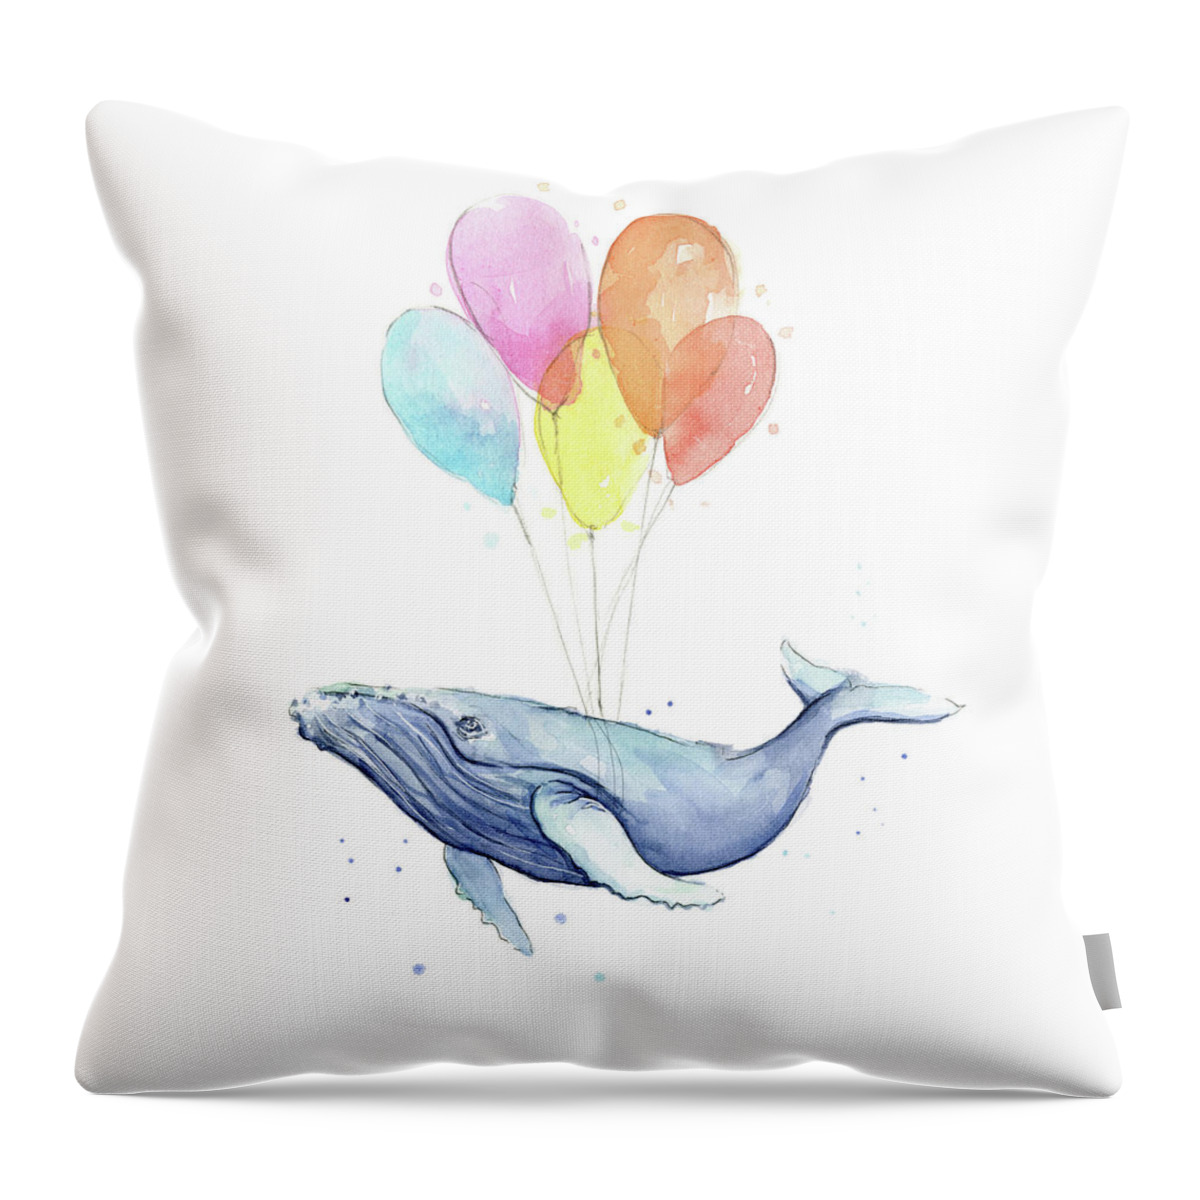 Whale Throw Pillow featuring the painting Flying Whale by Olga Shvartsur